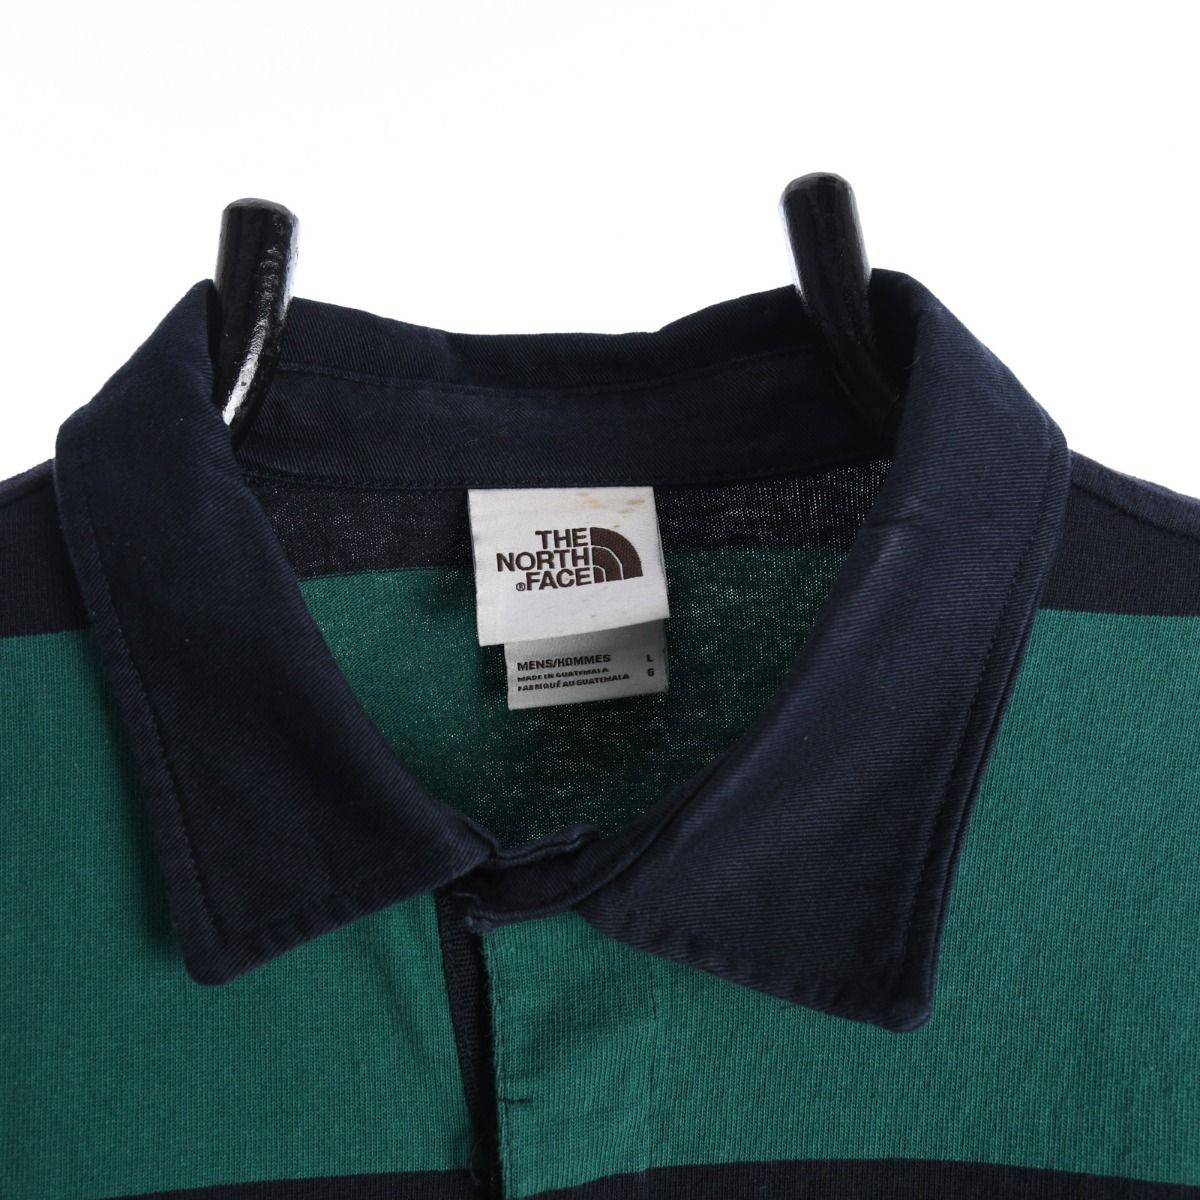 The North Face Rugby Shirt